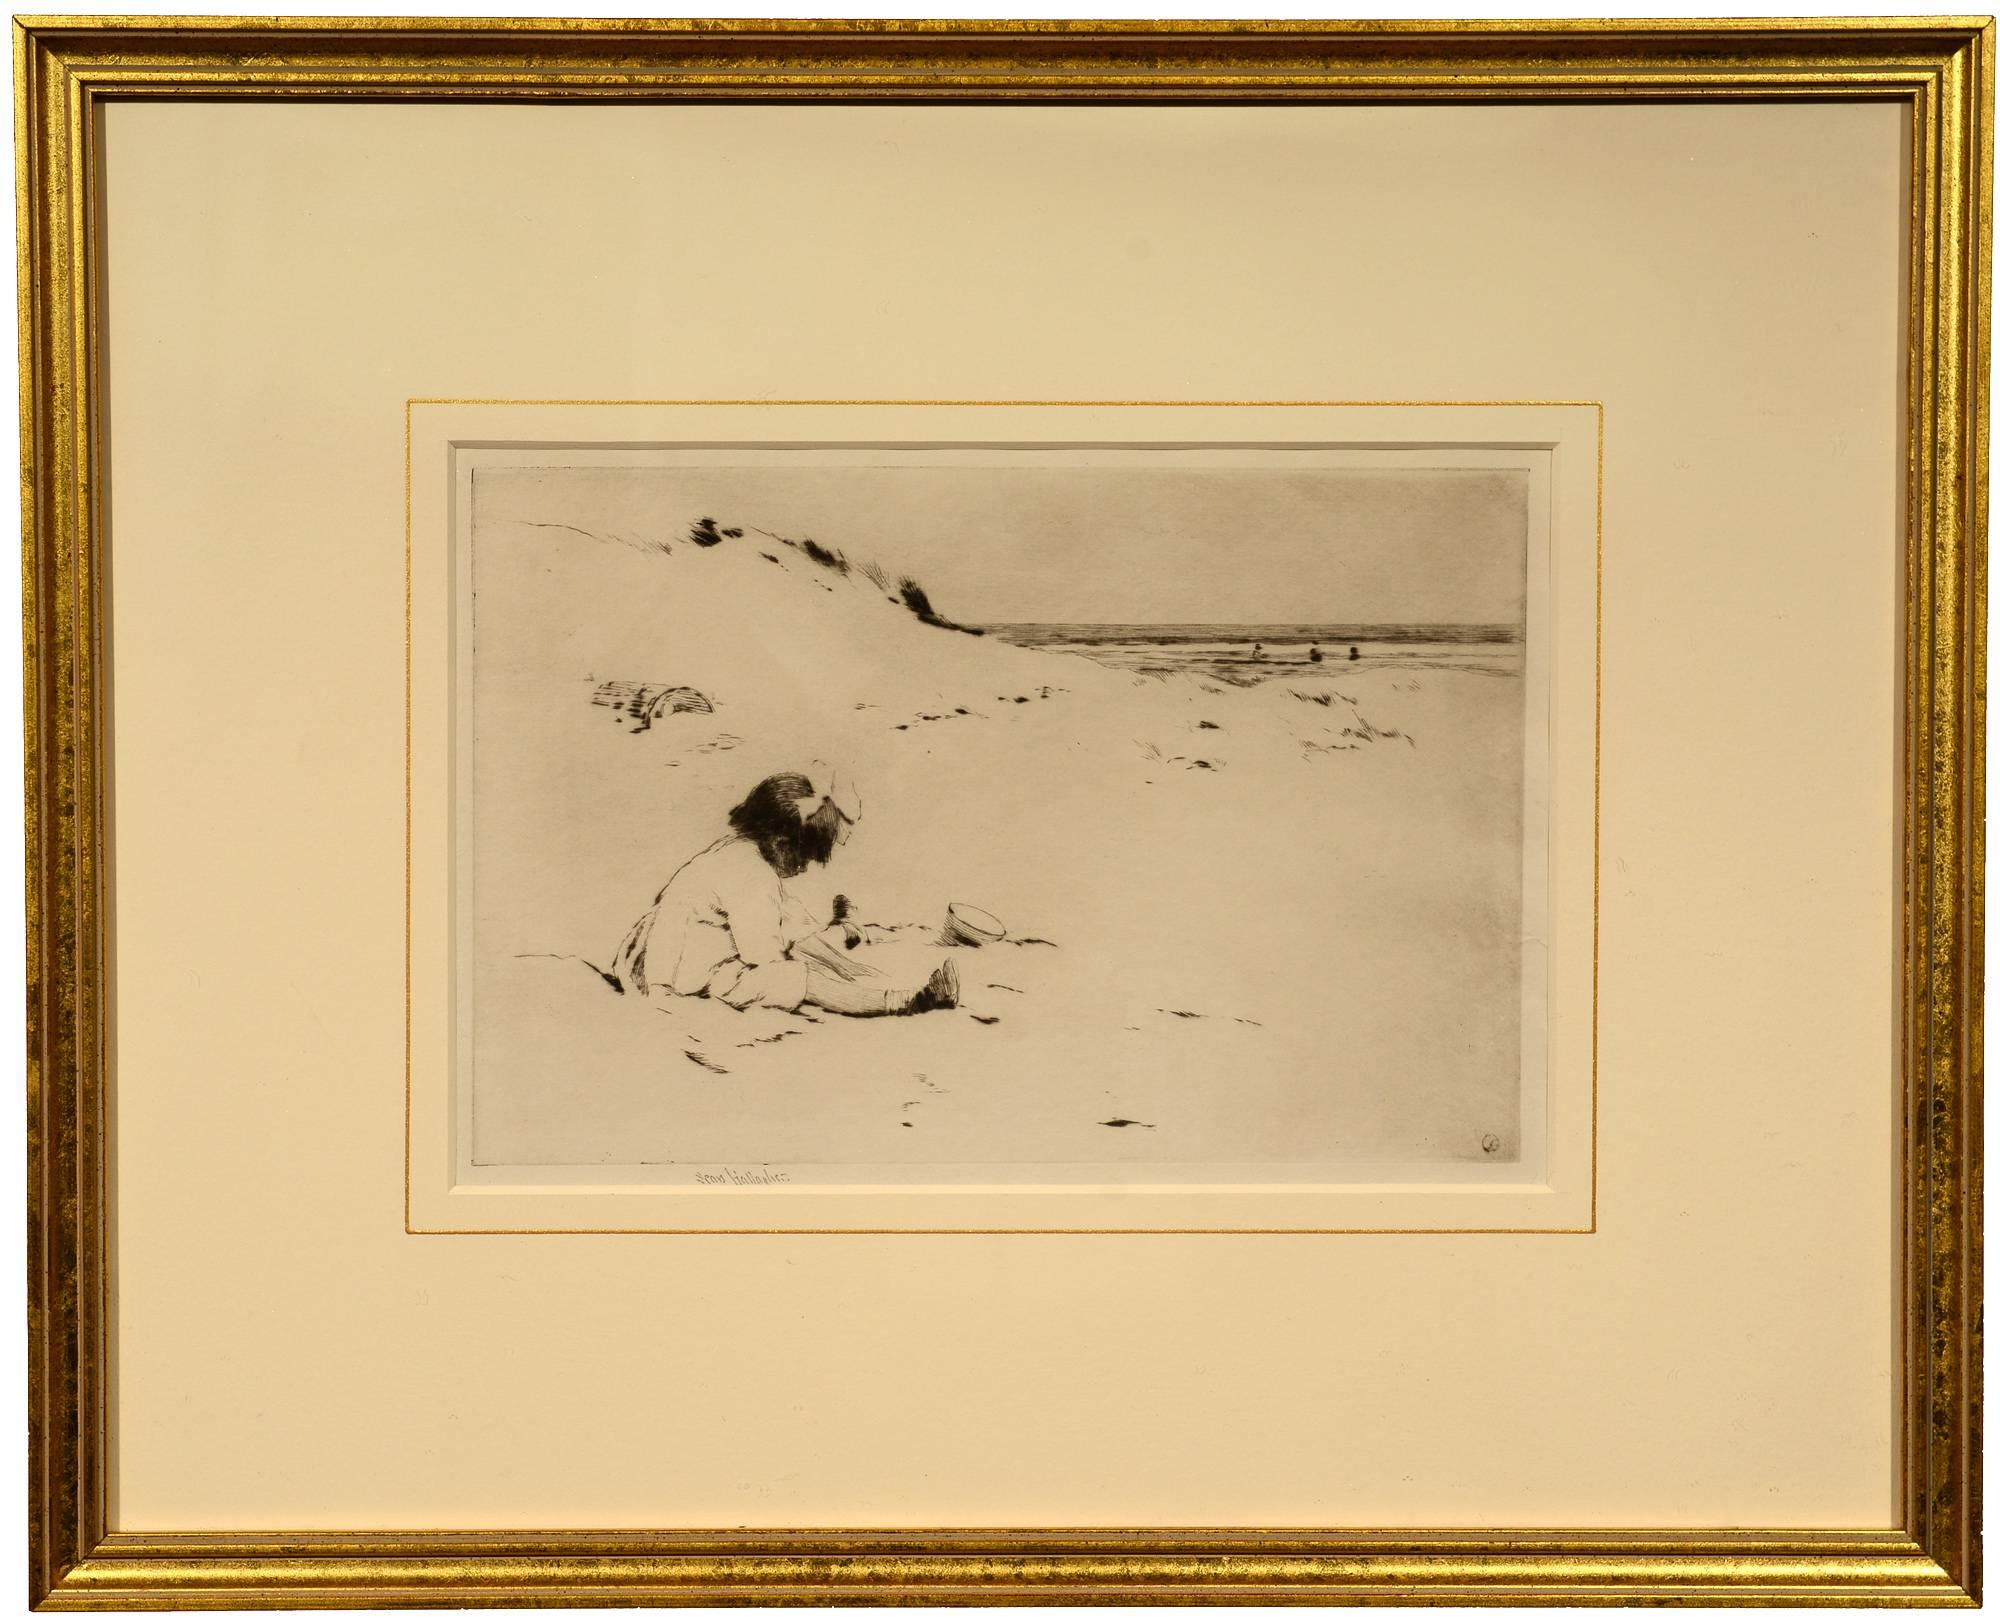 Child by the Dunes - Print by Sears Gallagher